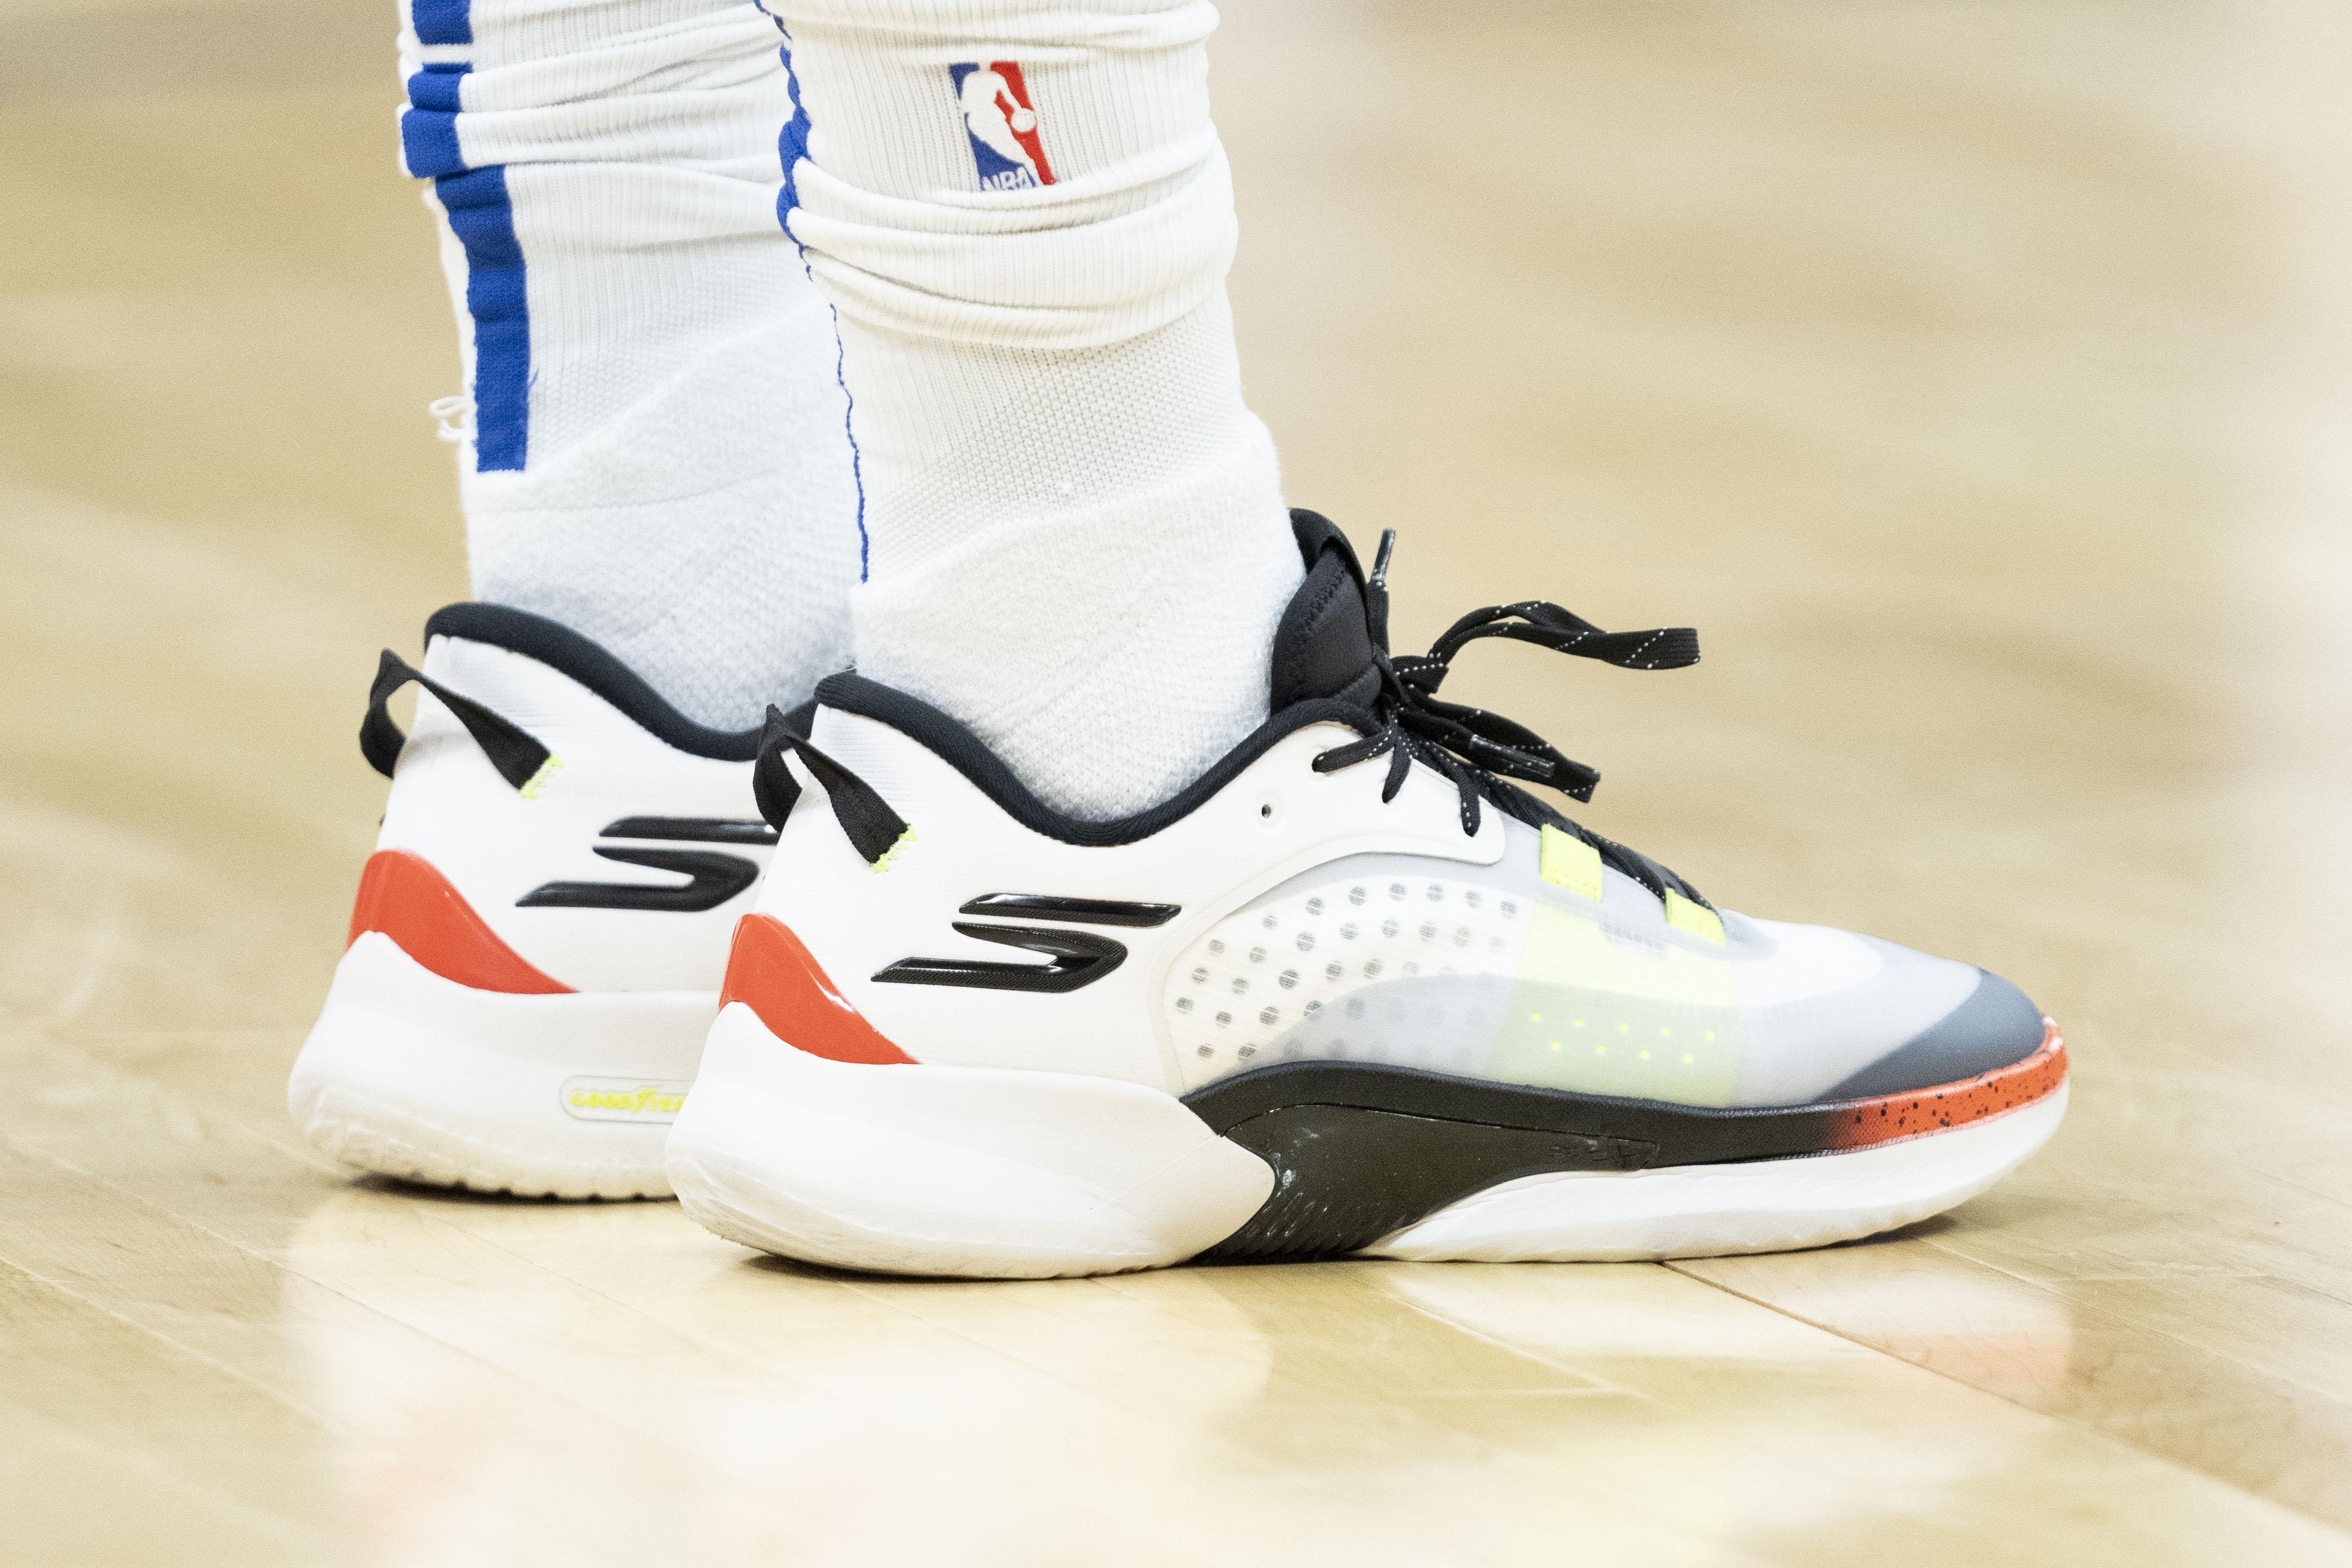 LA Clippers guard Terance Mann's white and black Skechers sneakers.